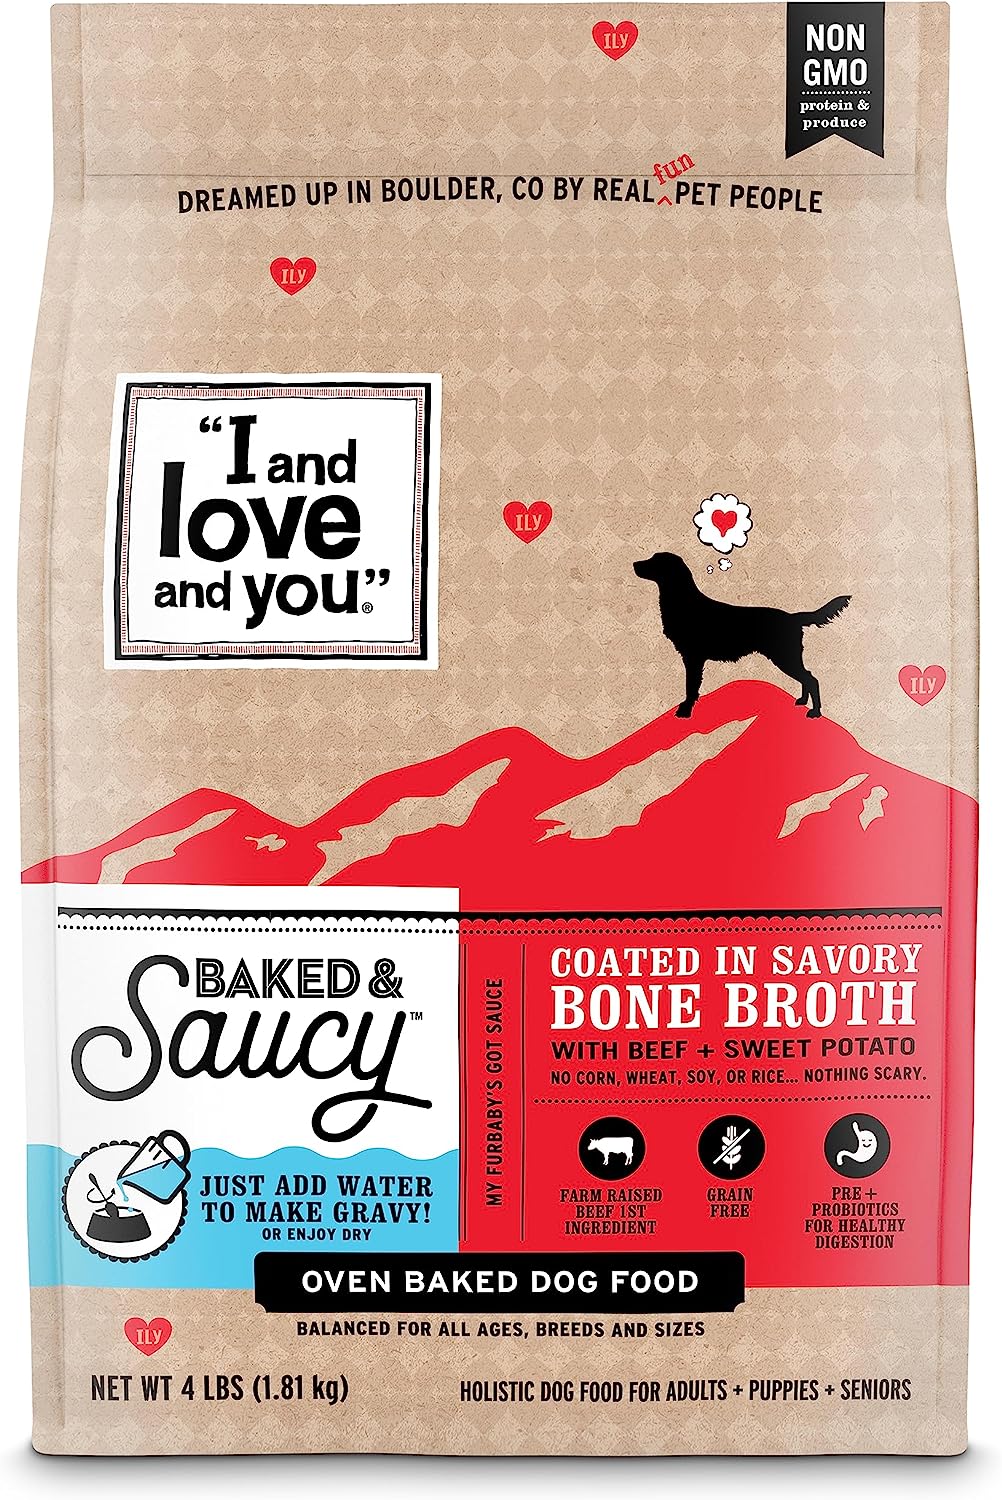 I AND LOVE AND YOU Baked and Saucy Dry Dog Food - Beef + Sweet Potato - Prebiotic + Probiotic, Real Meat, Grain Free, No Fillers, 4lb Bag